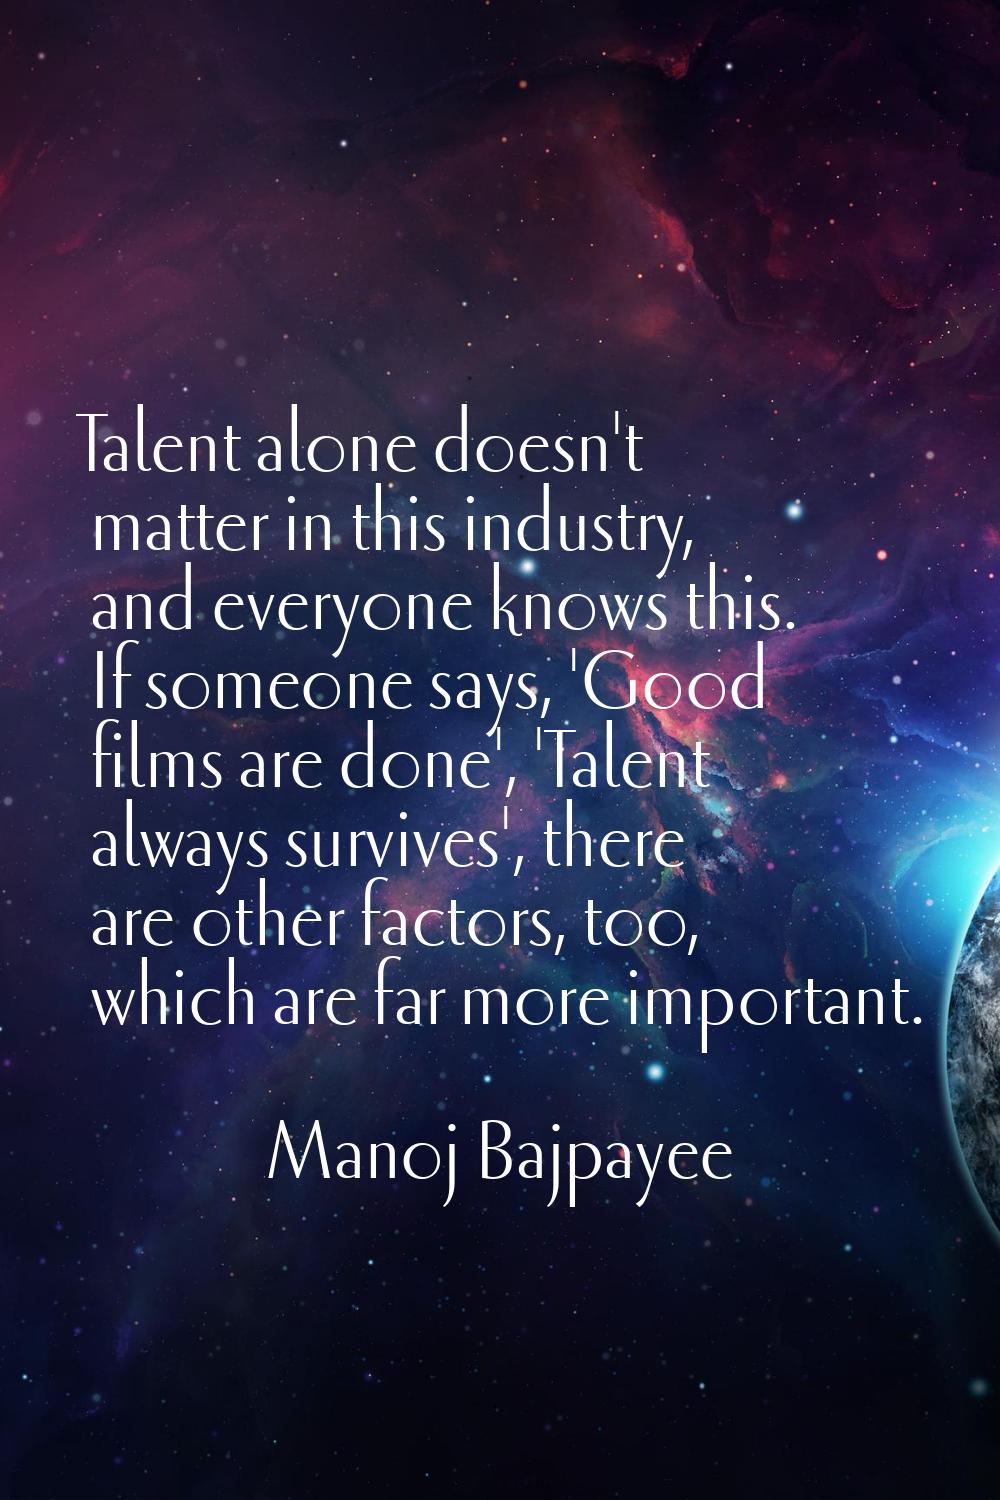 Talent alone doesn't matter in this industry, and everyone knows this. If someone says, 'Good films